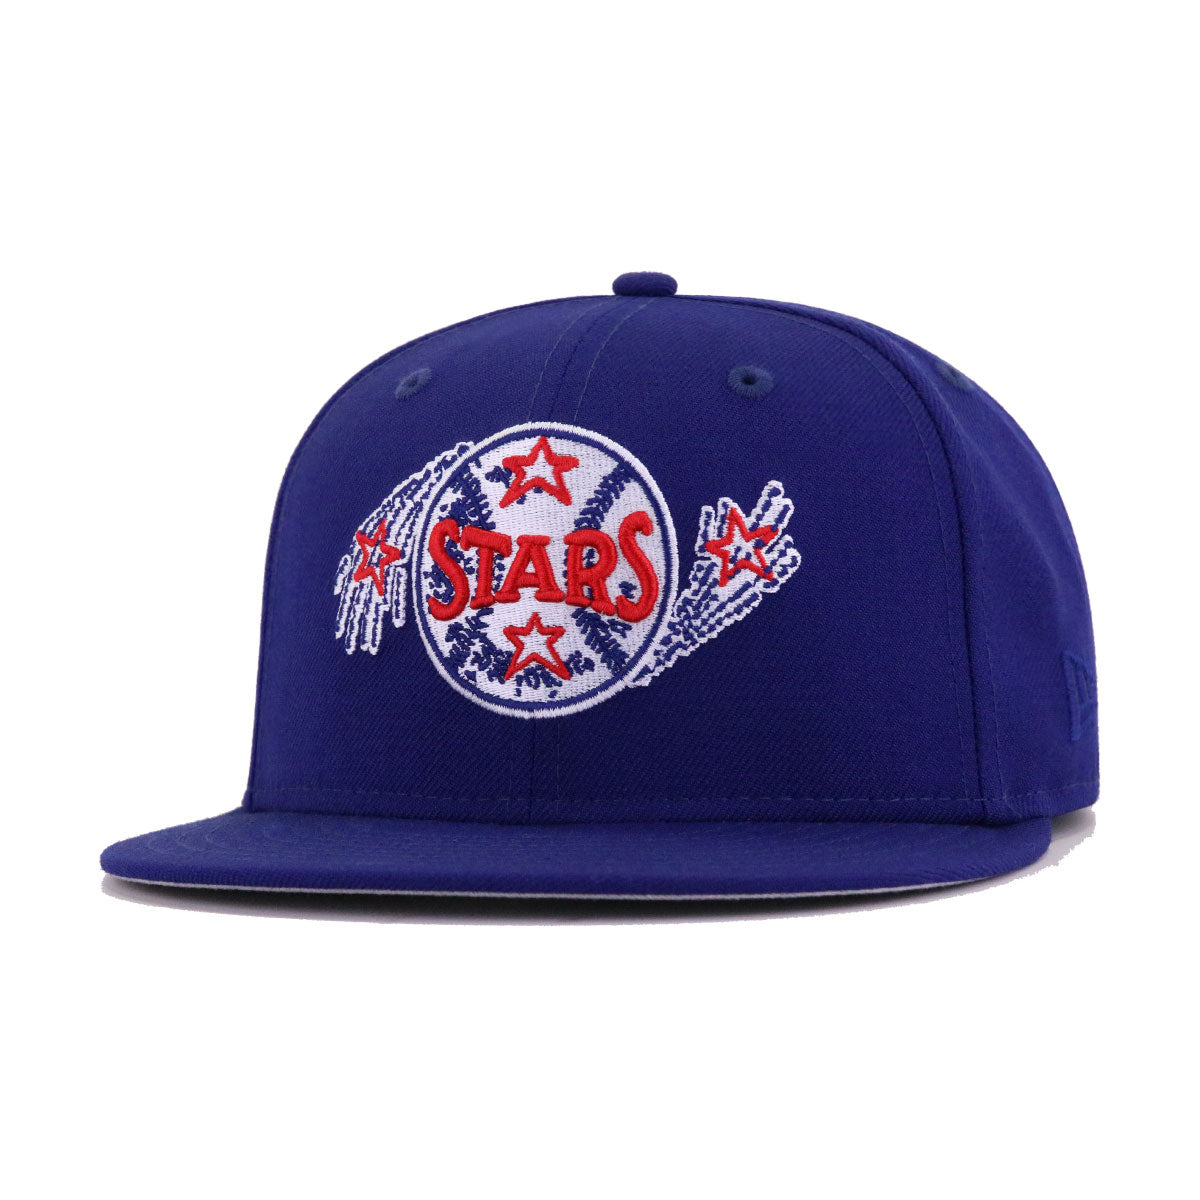 Hollywood Stars Dark Royal Blue New Era 59Fifty Fitted